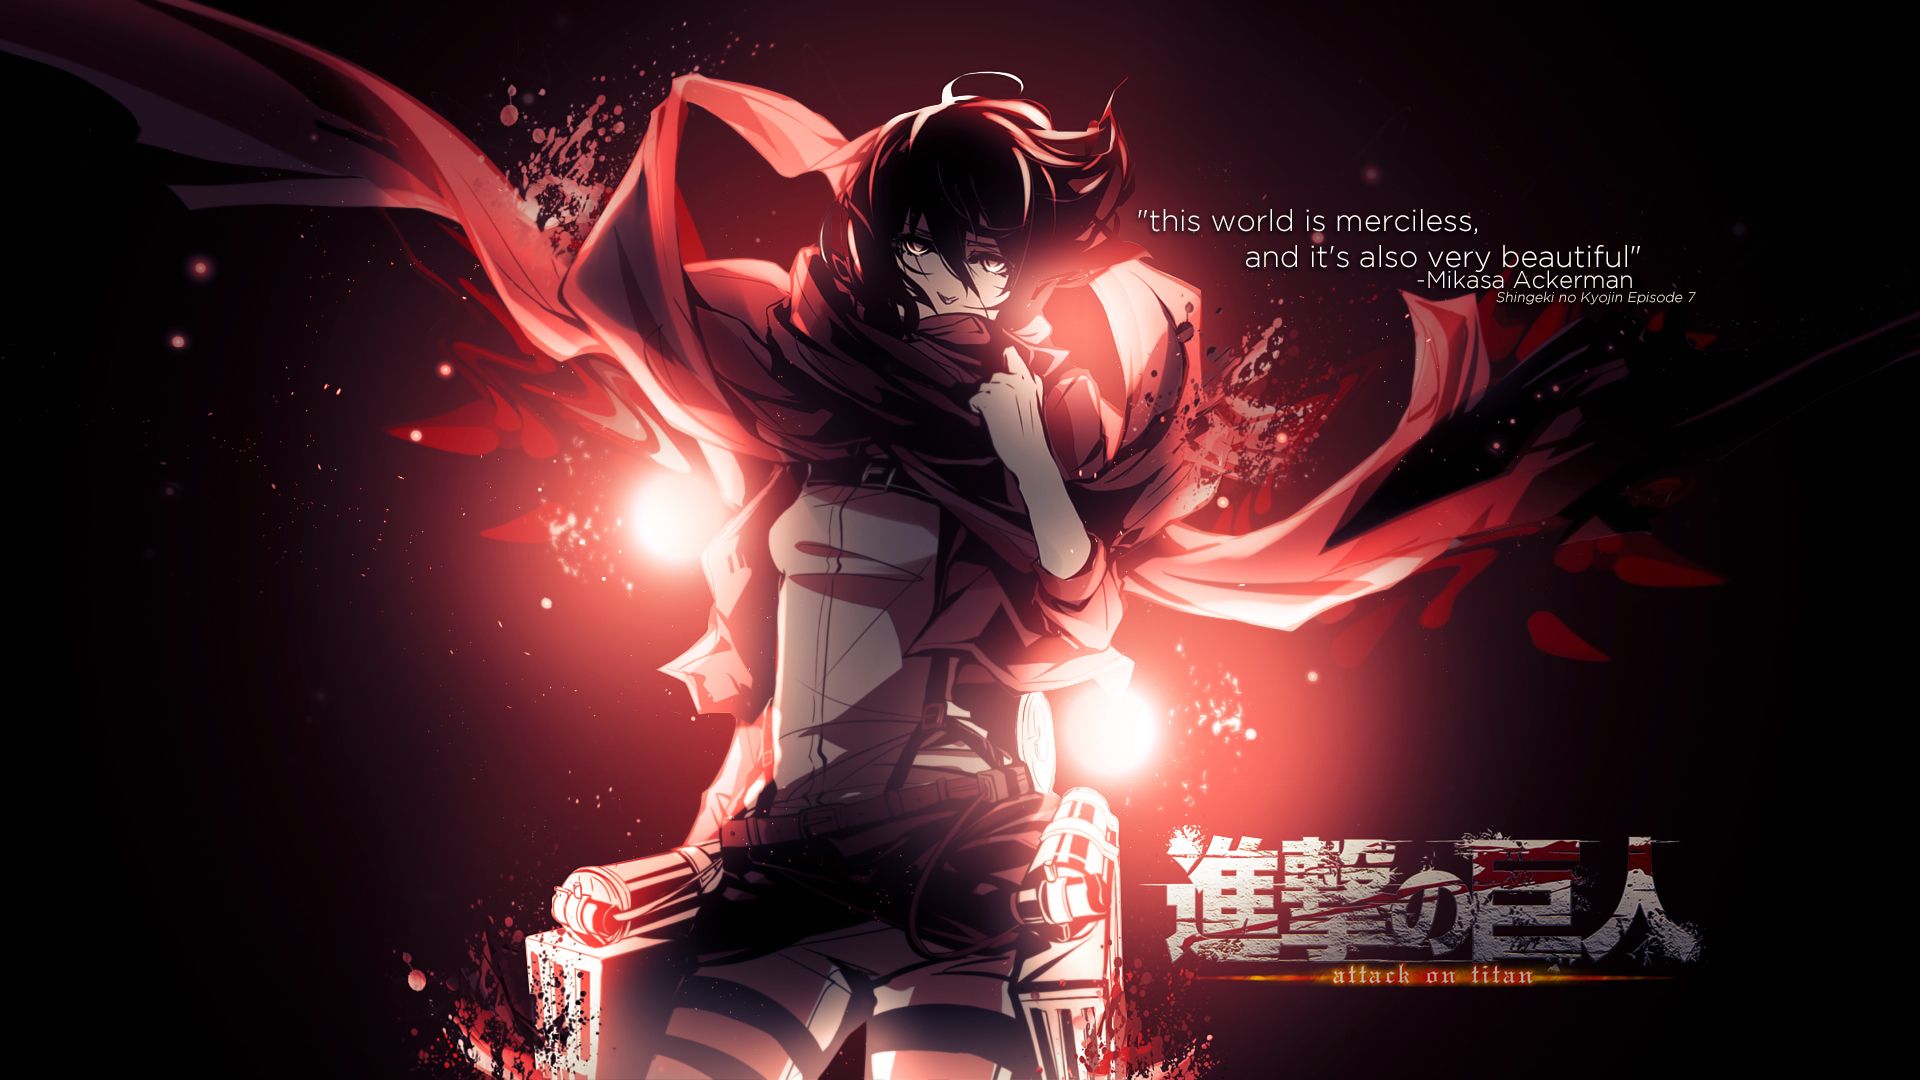 My fav character from Attack on Titian. Anime wallpaper, Cool anime wallpaper, Attack on titan